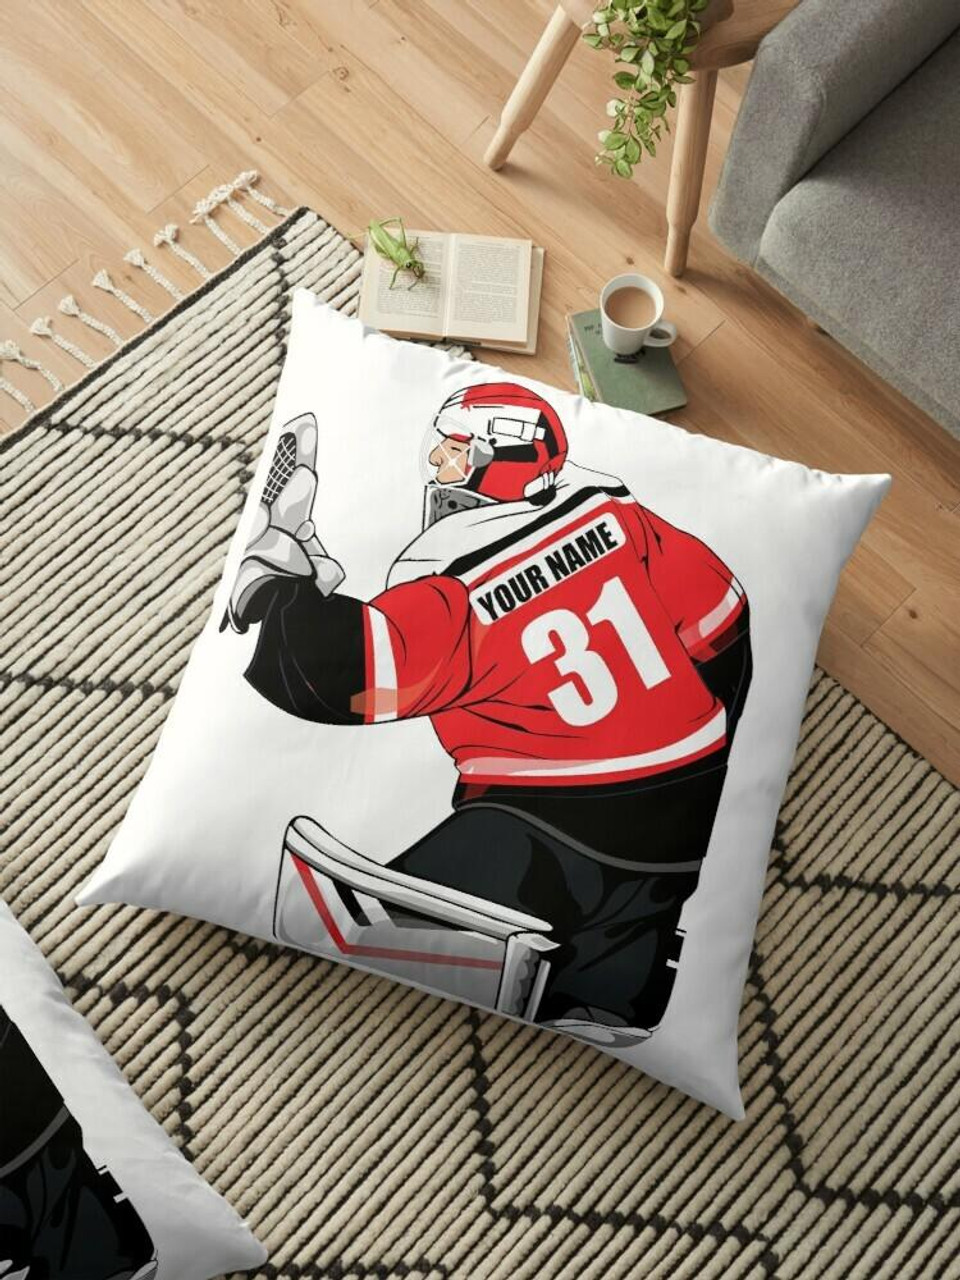 https://cdn11.bigcommerce.com/s-fgahe43b/images/stencil/1280x1280/products/850/10603/stinky-lockers-personalized-hockey-floor-pillow-cover__23888.1655050343.jpg?c=2